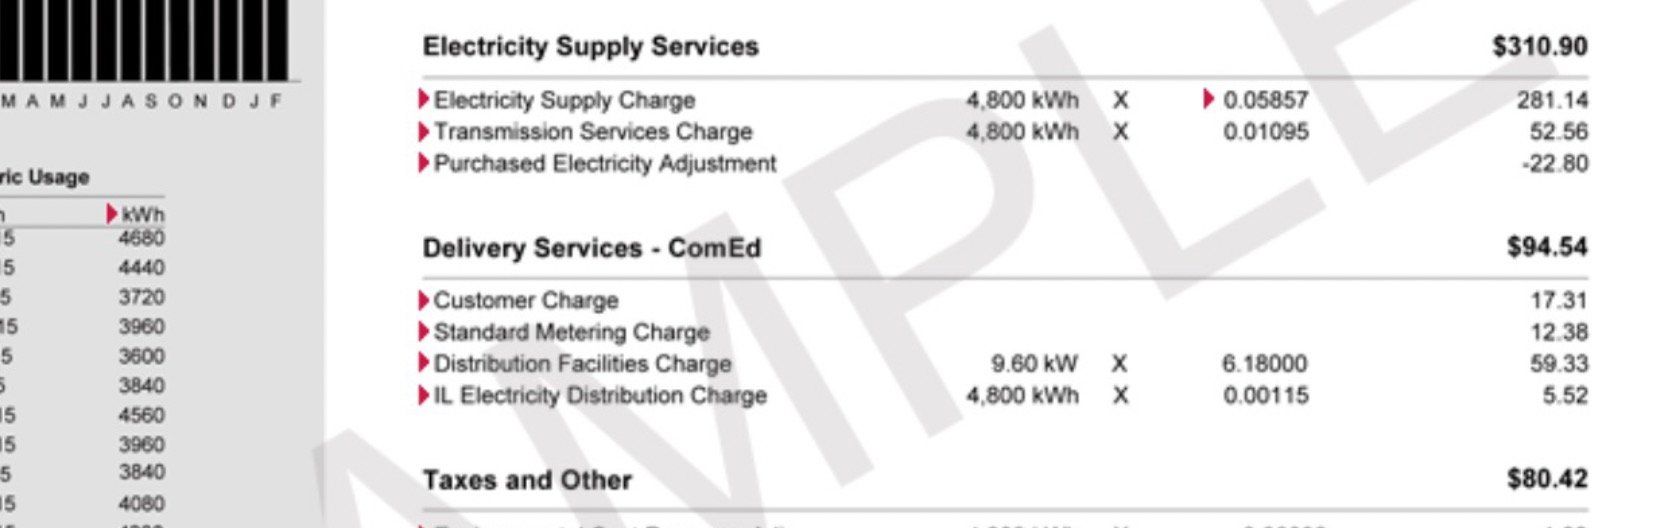 electricity supply charges vs distribution charges